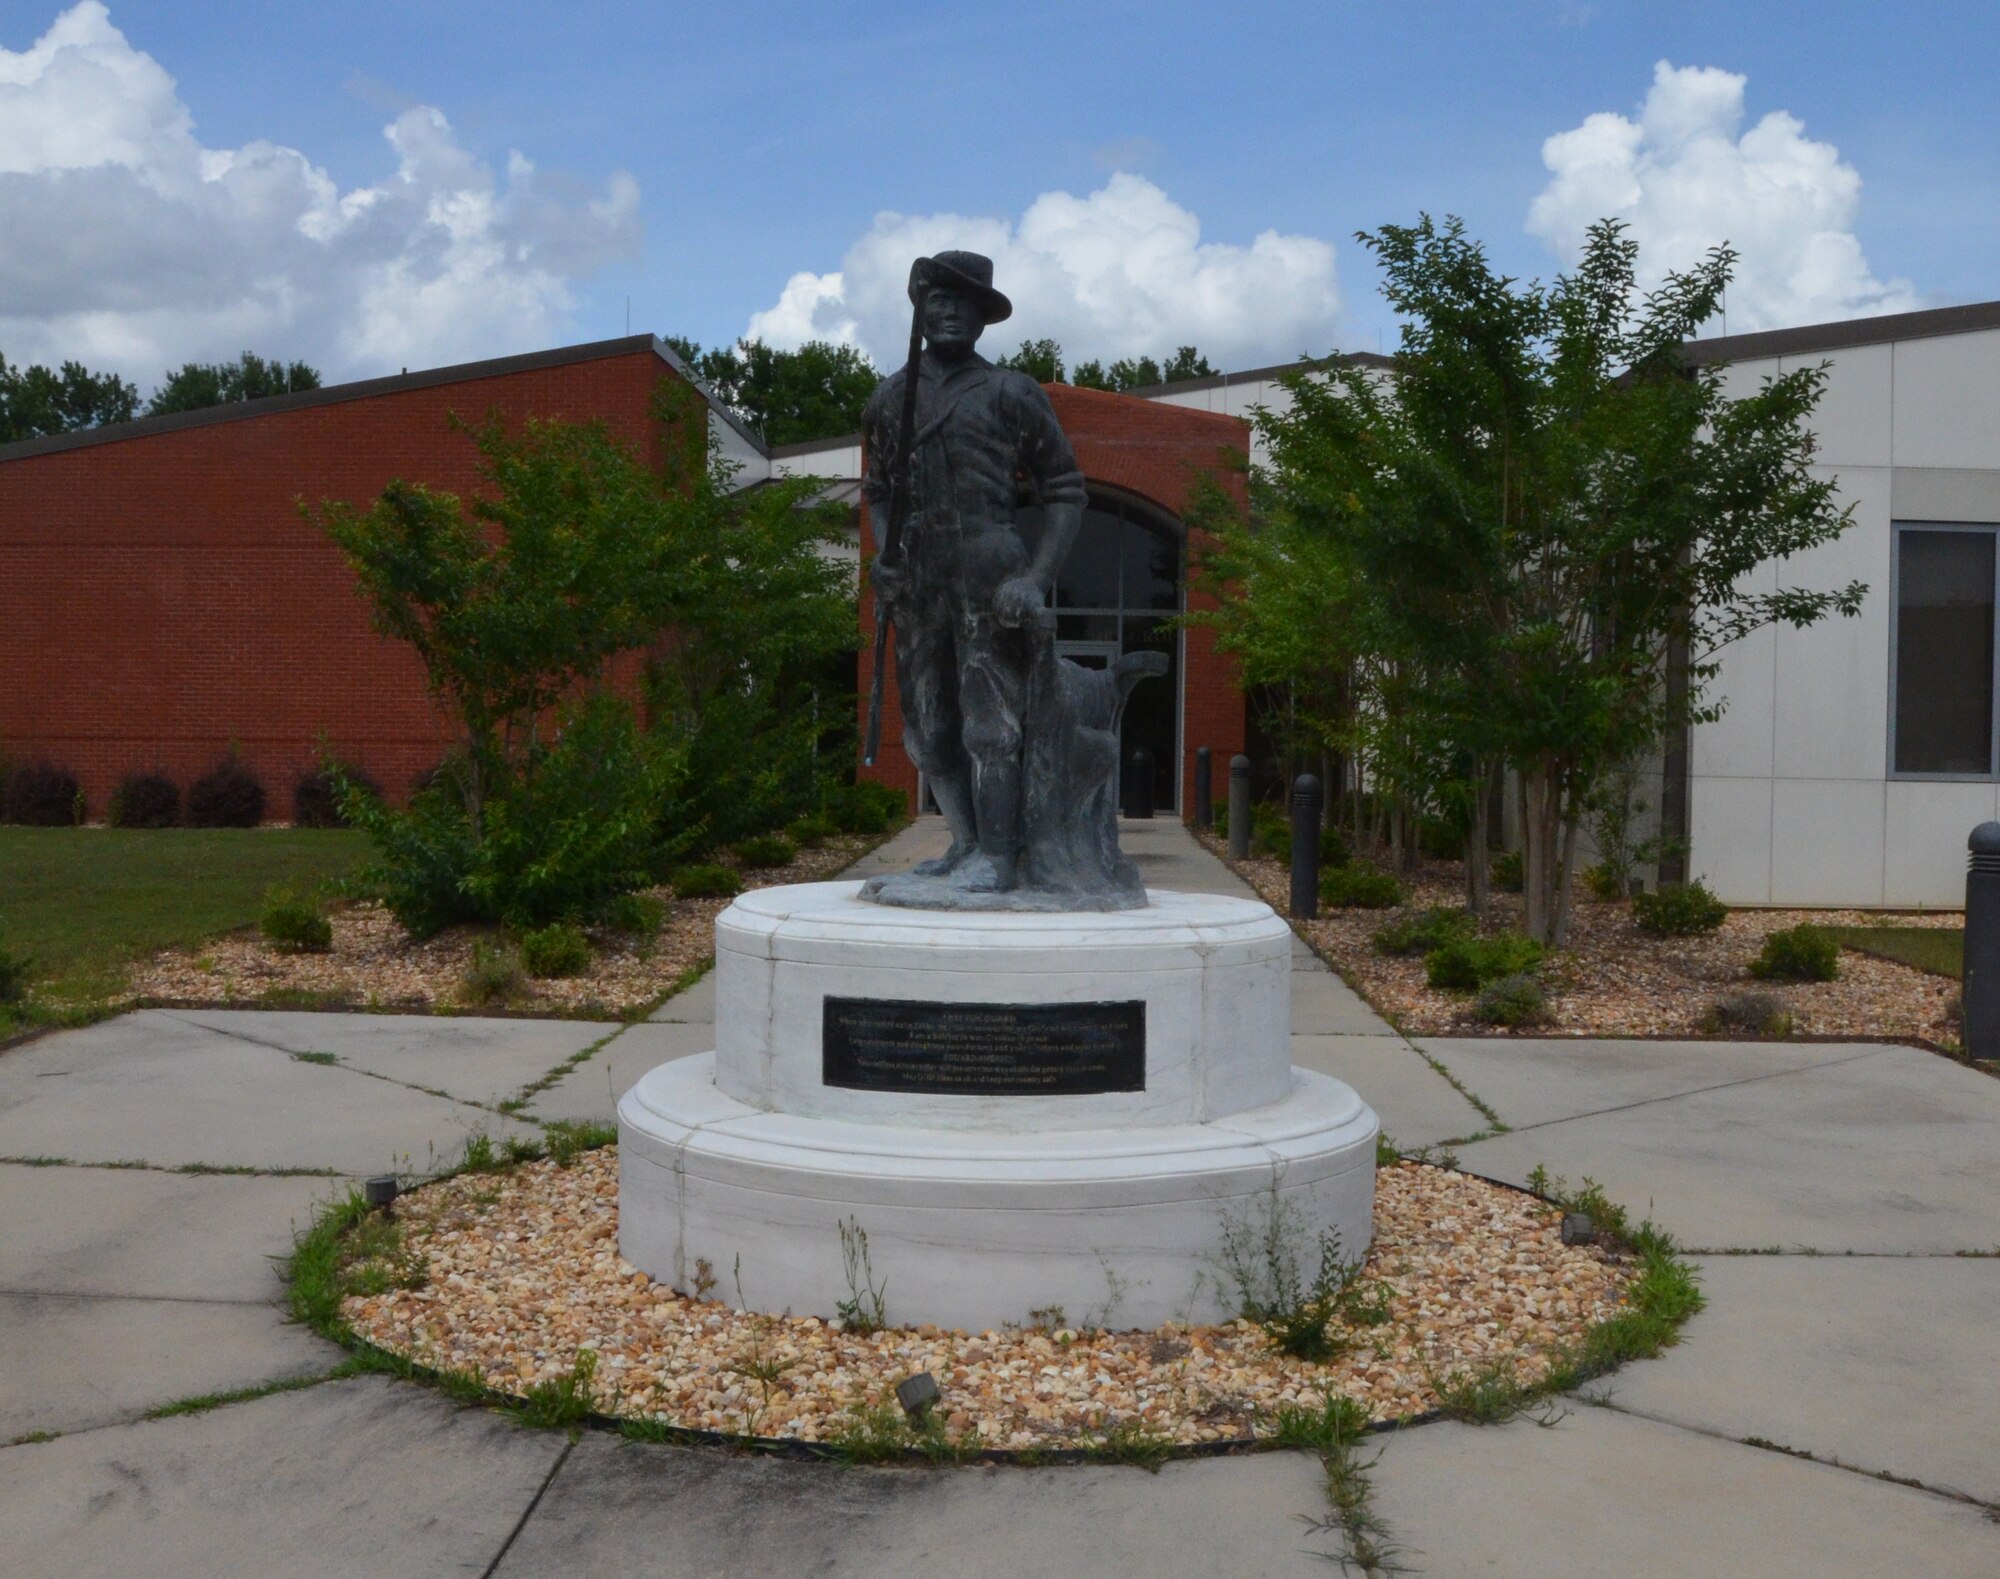 The Minuteman statue stands proudly in front of the 116th Force Support Squadron, Robins Air Force Base, Ga., May,26, 2015.  Now as a symbol of the National Guard, minutemen were once members of teams of select men from the American colonial partisan militia during the American Revolutionary War. They provided a highly mobile and rapidly deployed force that allowed the colonies to respond quickly to the threat of war.   (U.S. Air National Guard photo by Tech. Sgt. Julie Parker/Released)